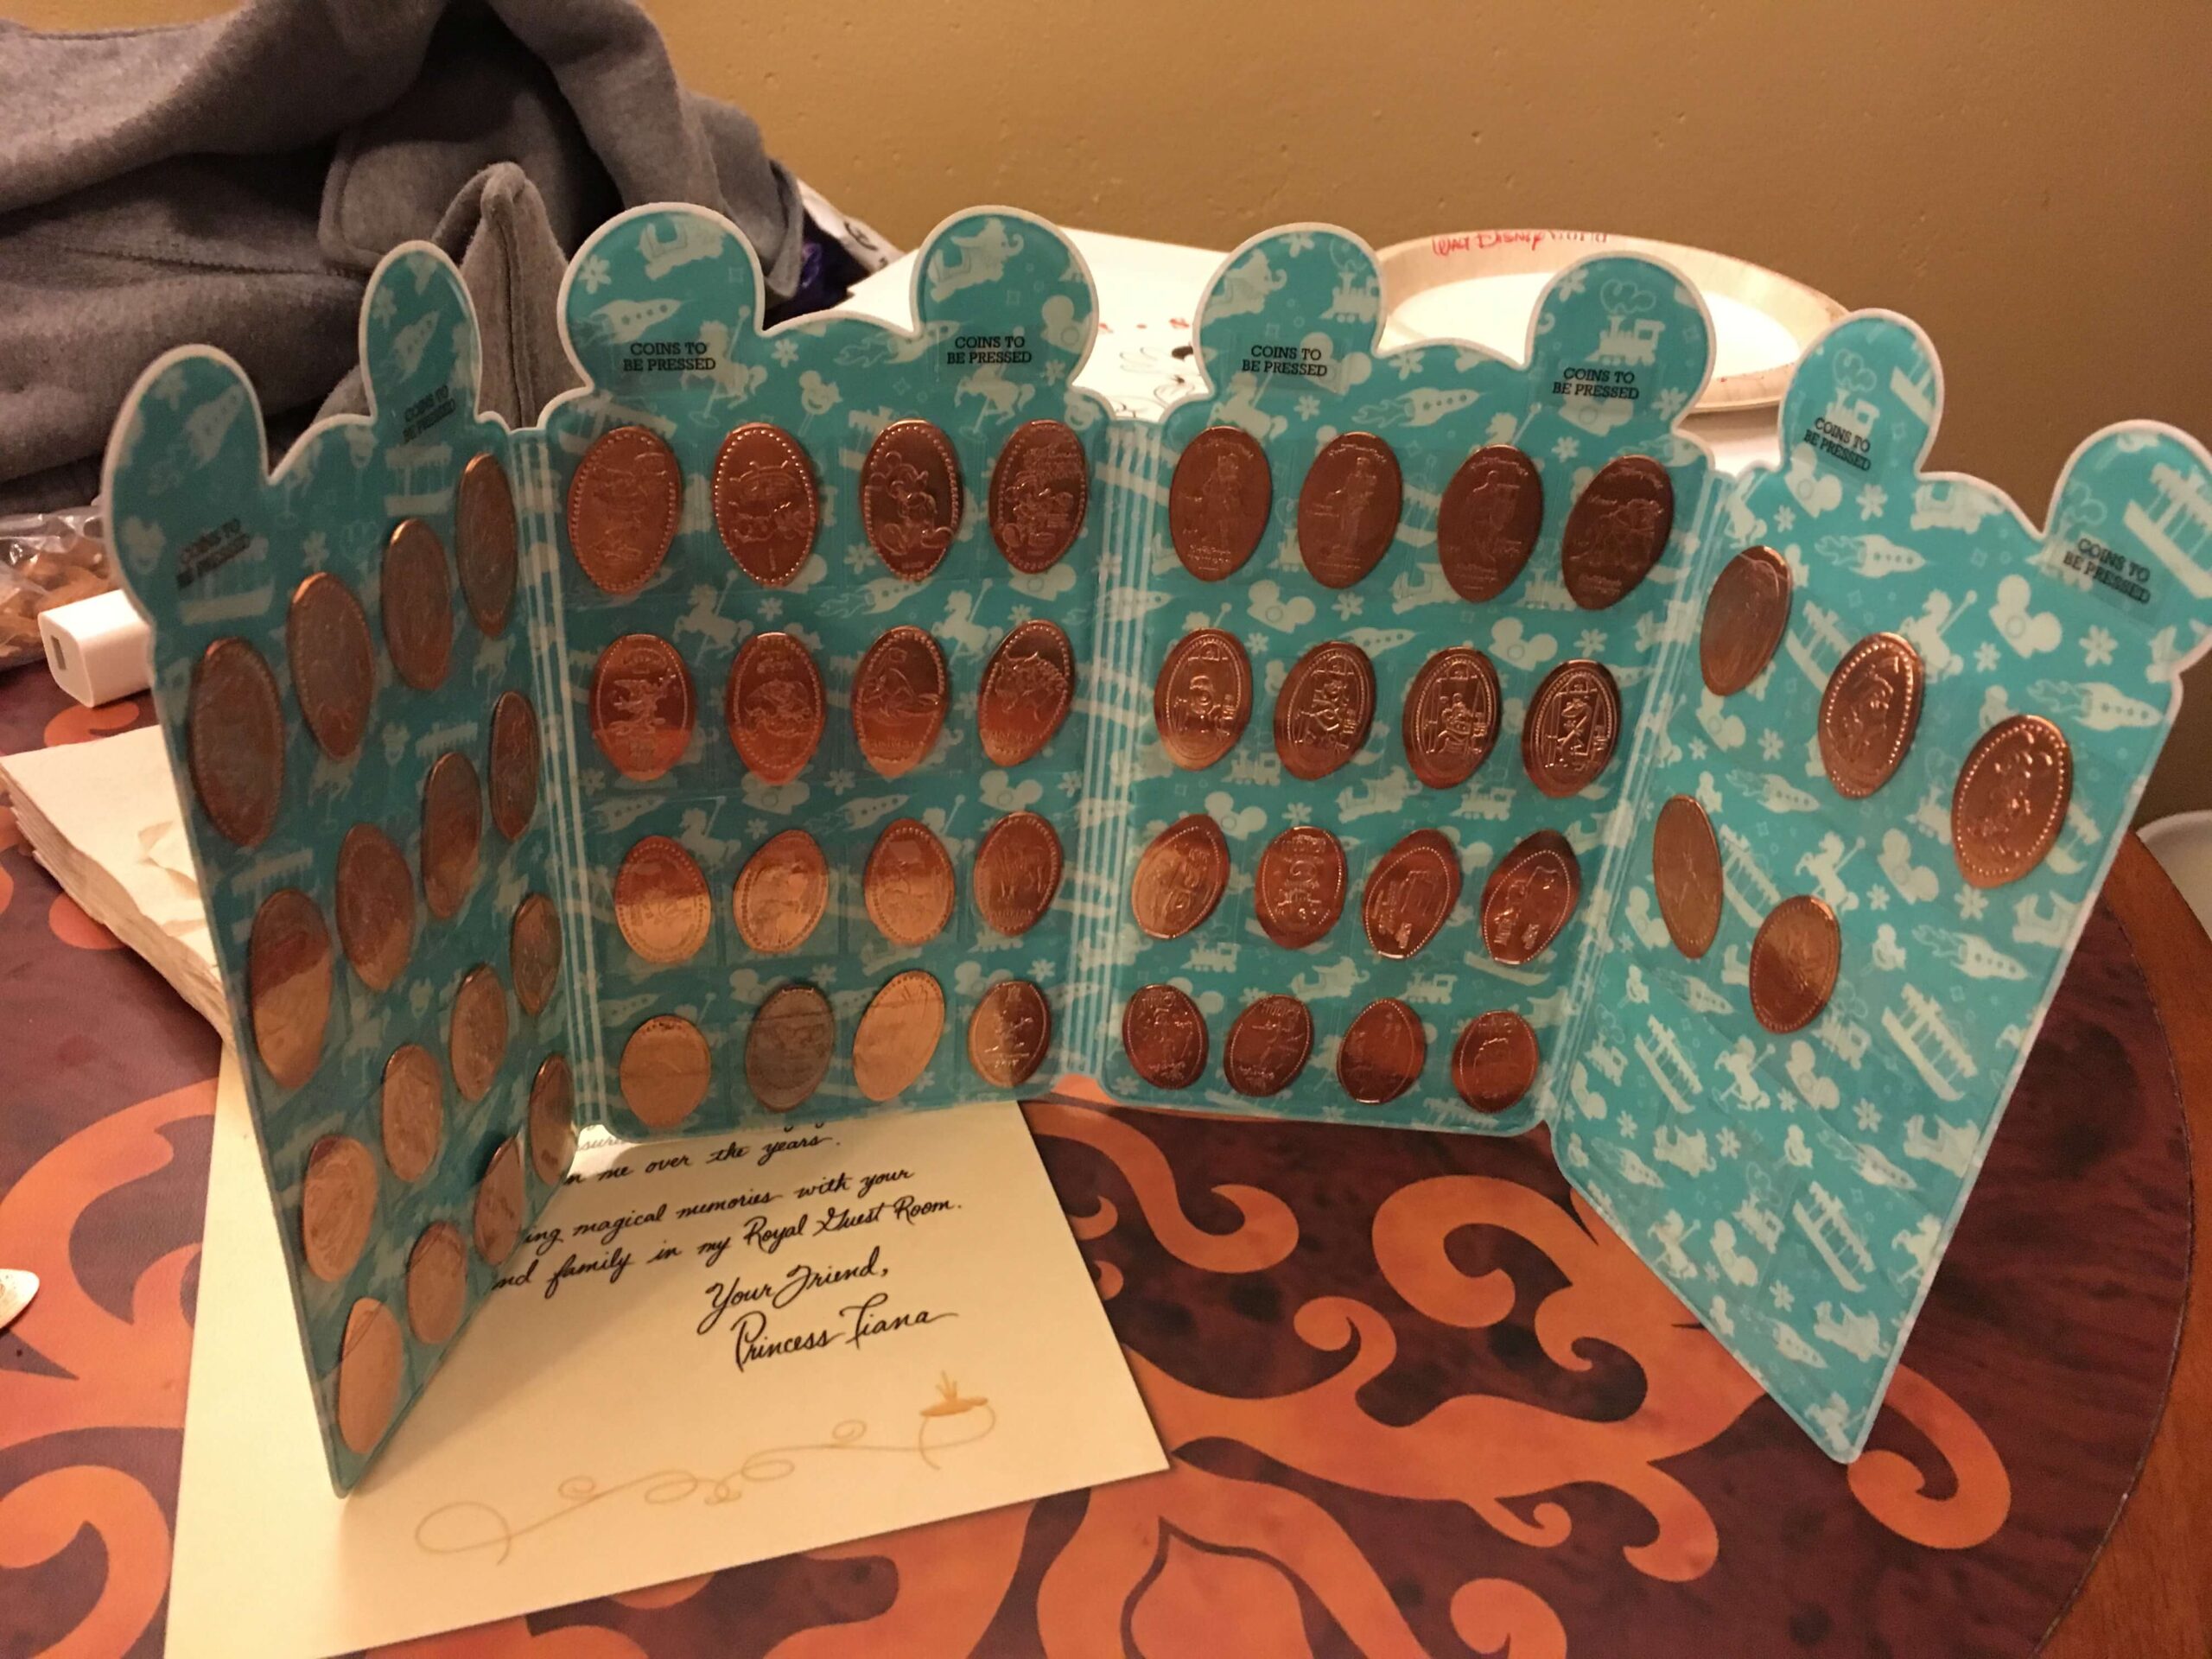 A pressed penny collection sitting in a pressed penny holder book